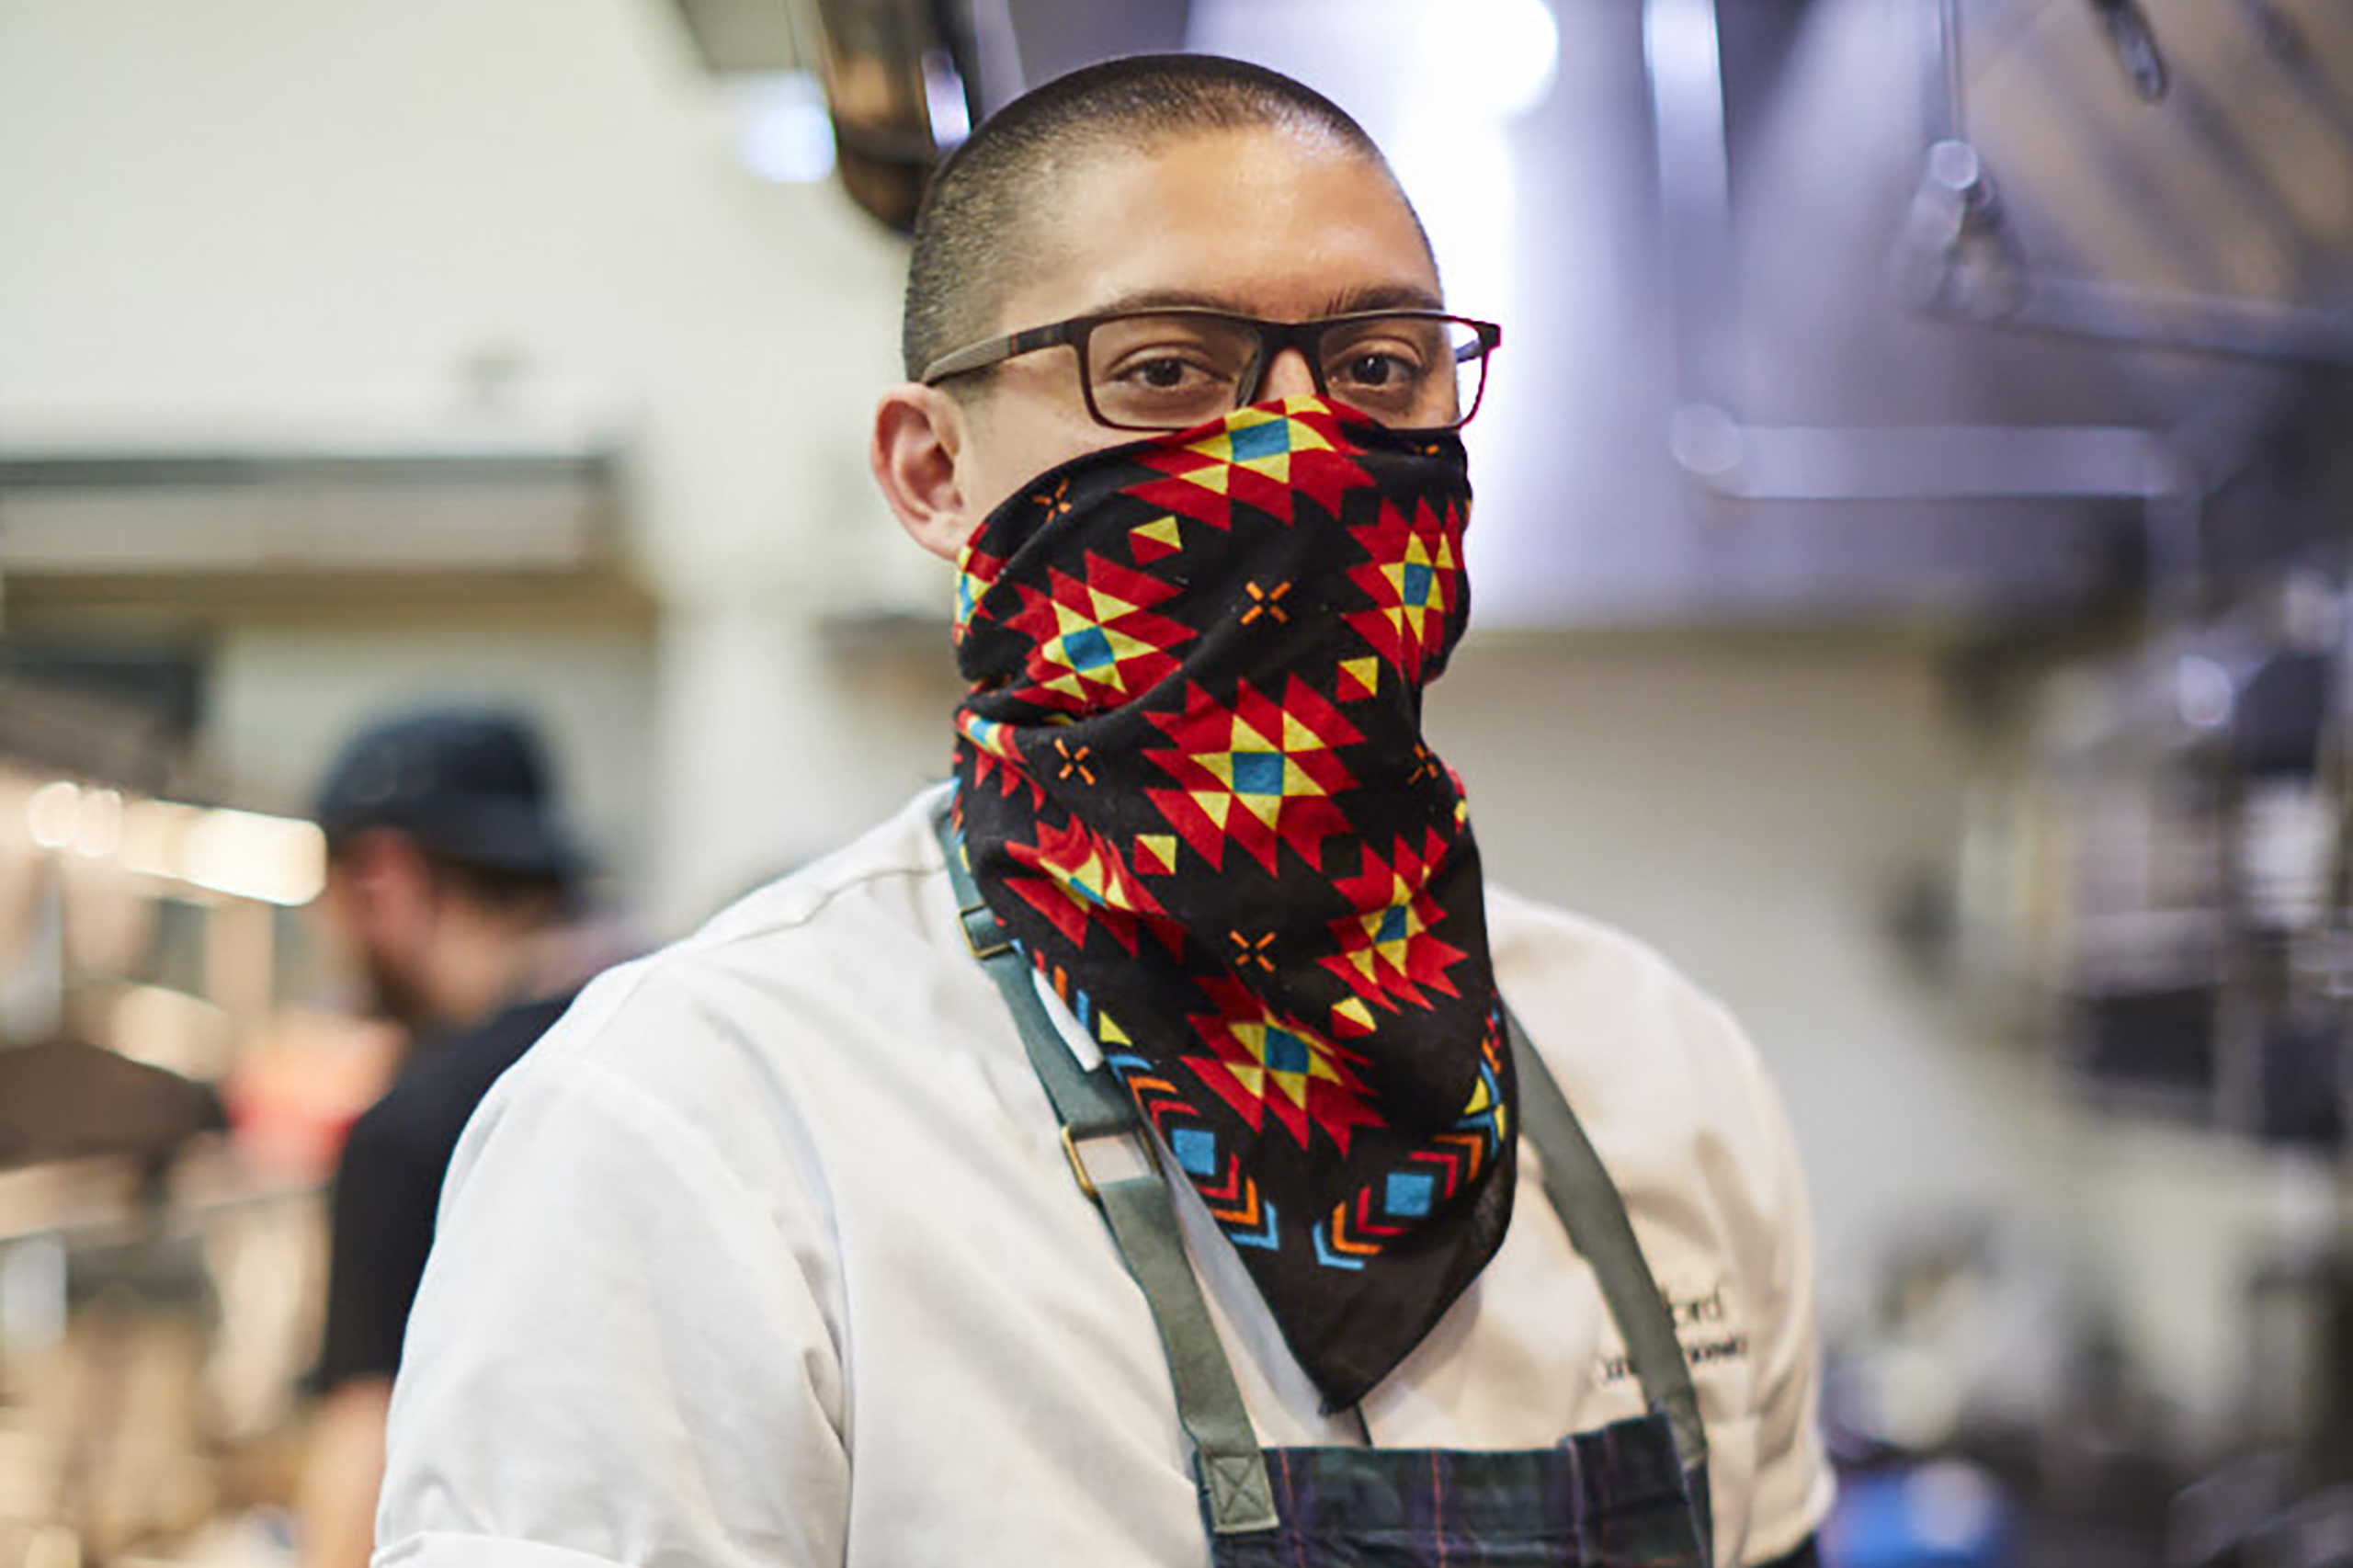 Redbird Sous Chef with colorful bandana in red, yellow, green